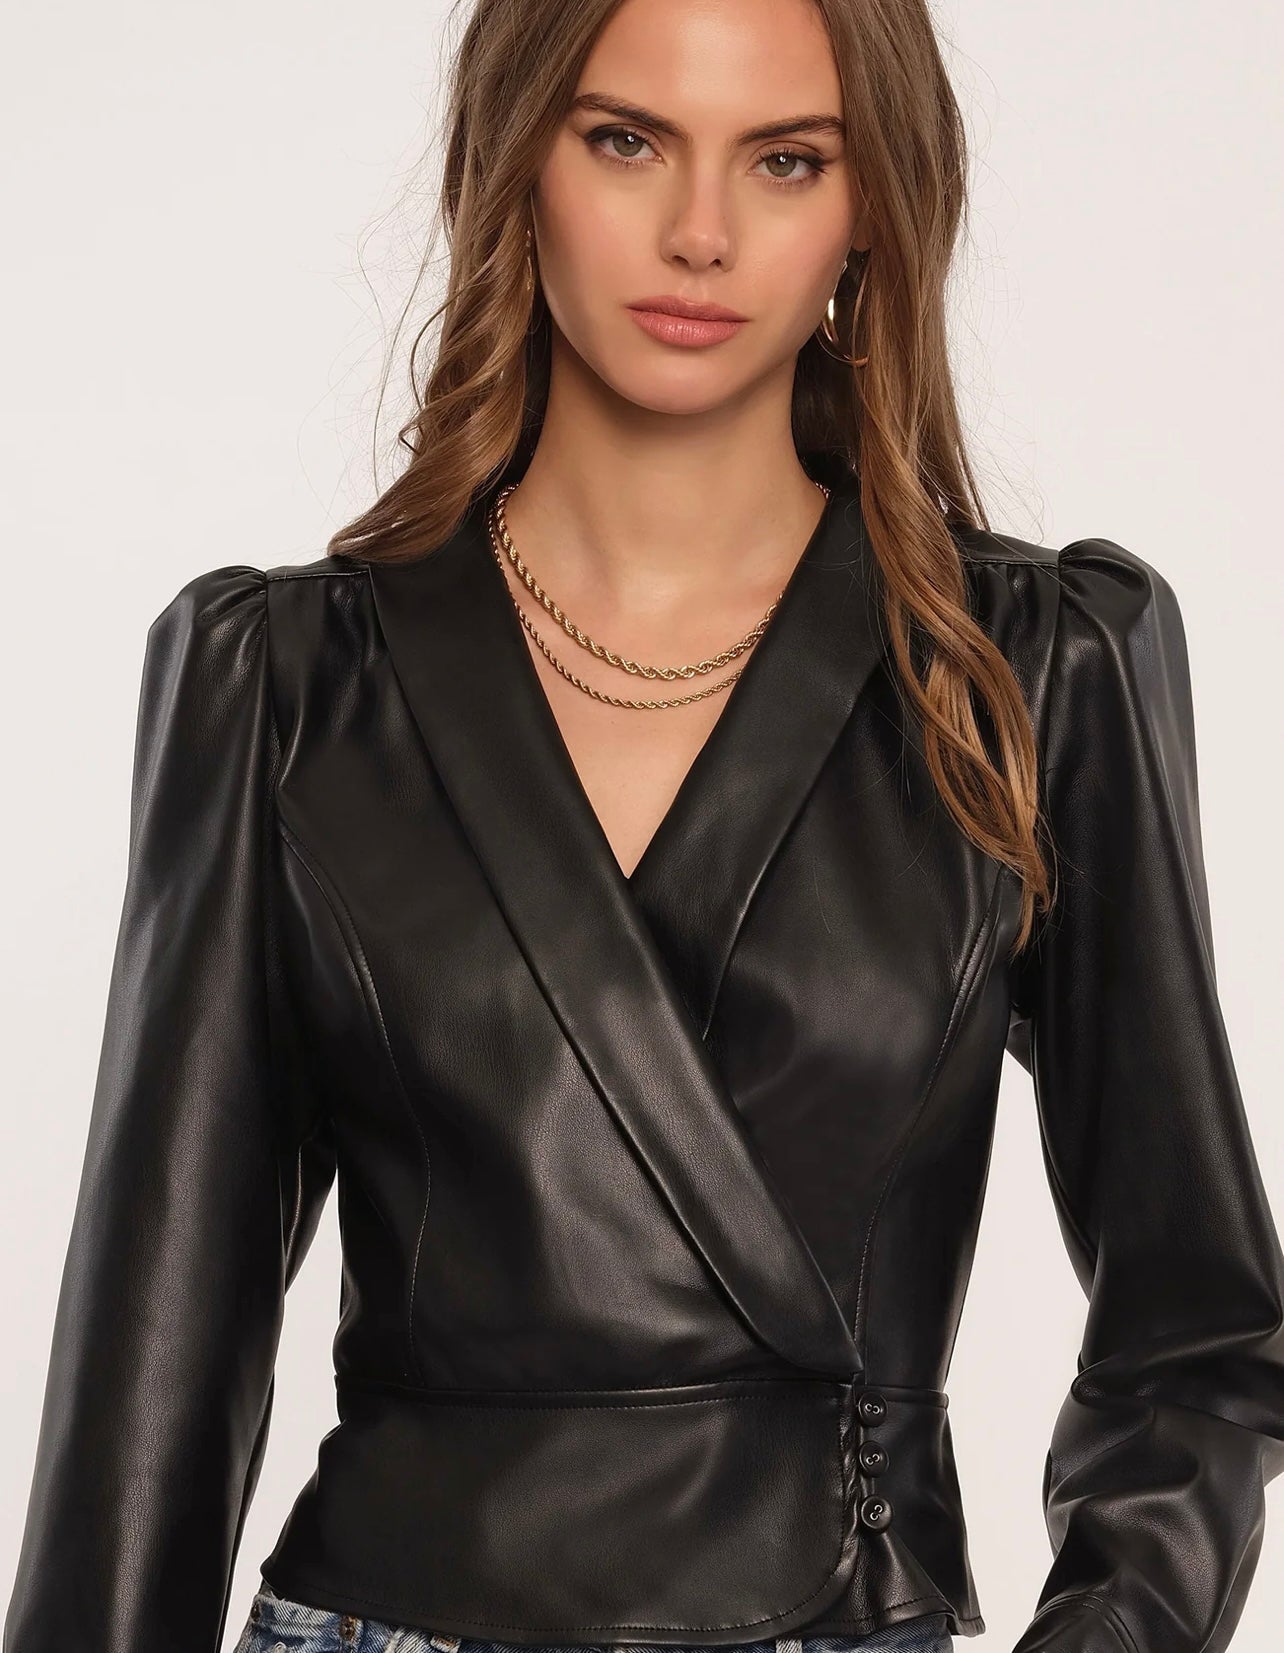 The Palma Blk Leather shirt